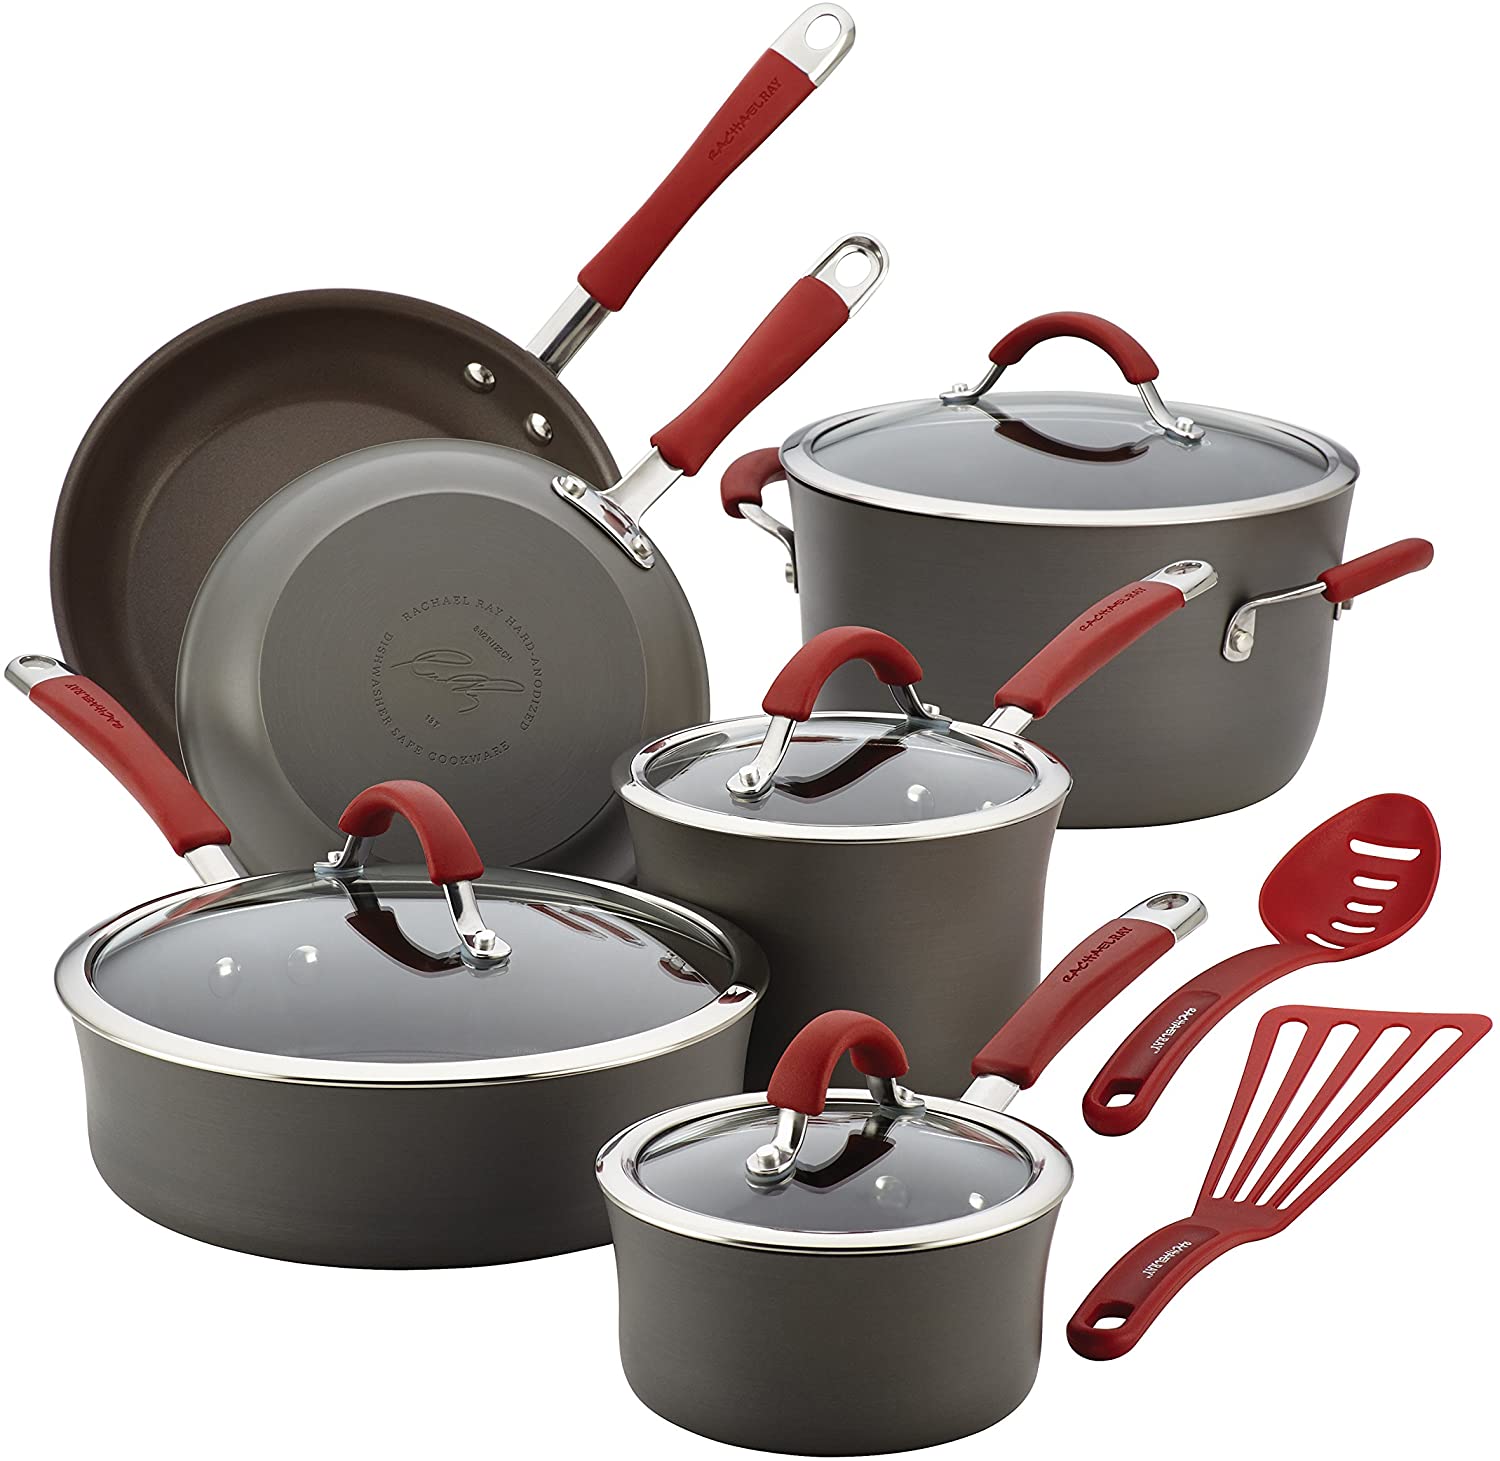 Rachael Ray Oven Safe Hard Anodized Cookware, 12-Piece